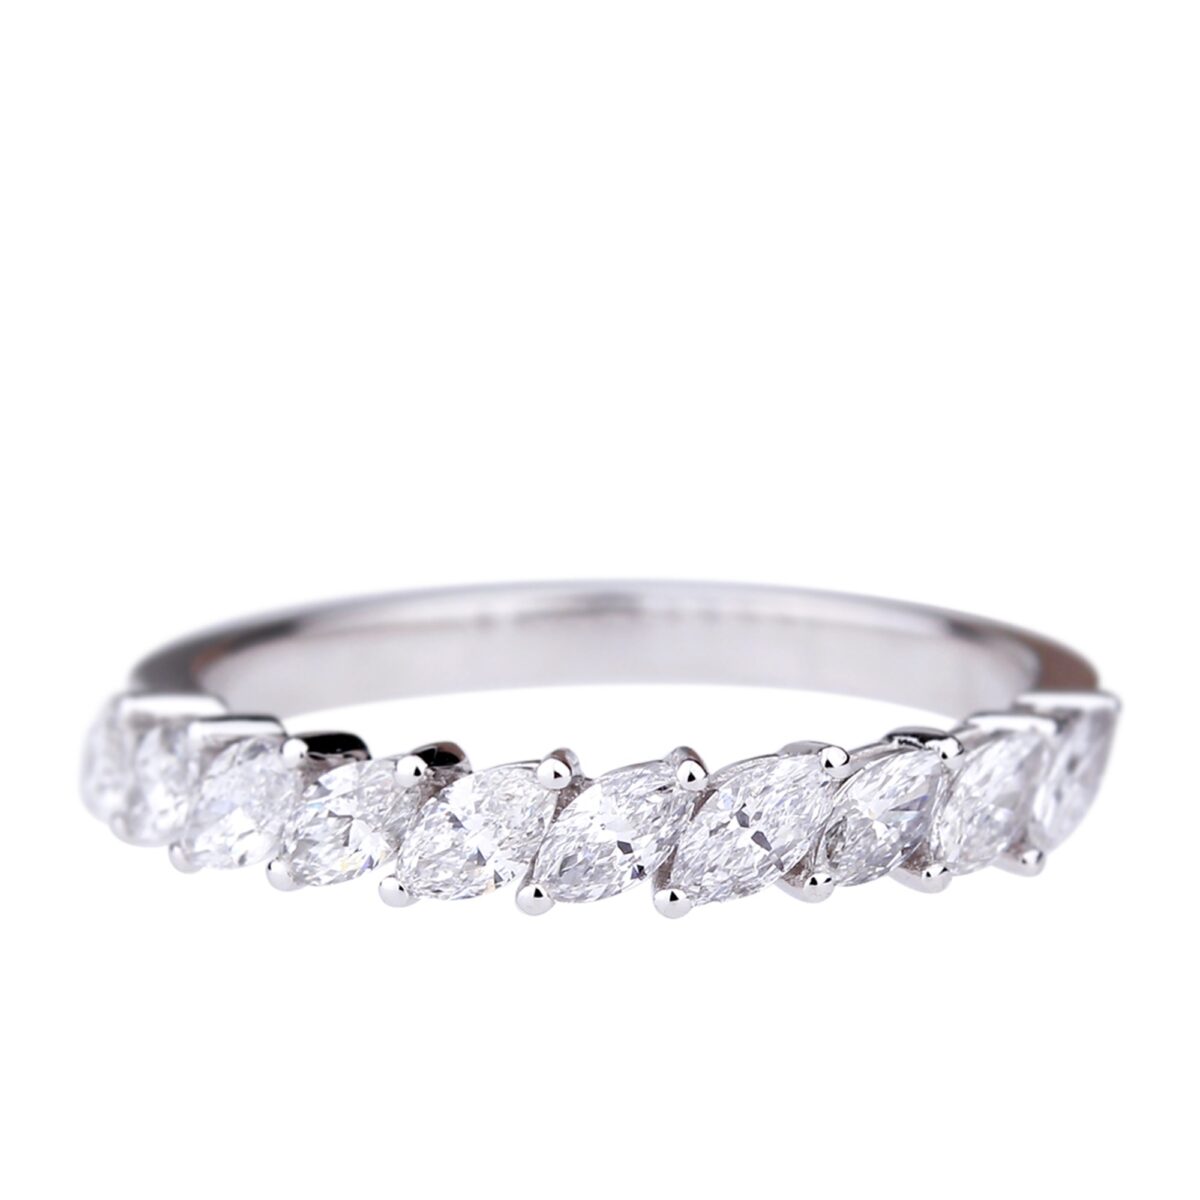 Alliance diamants taille marquise